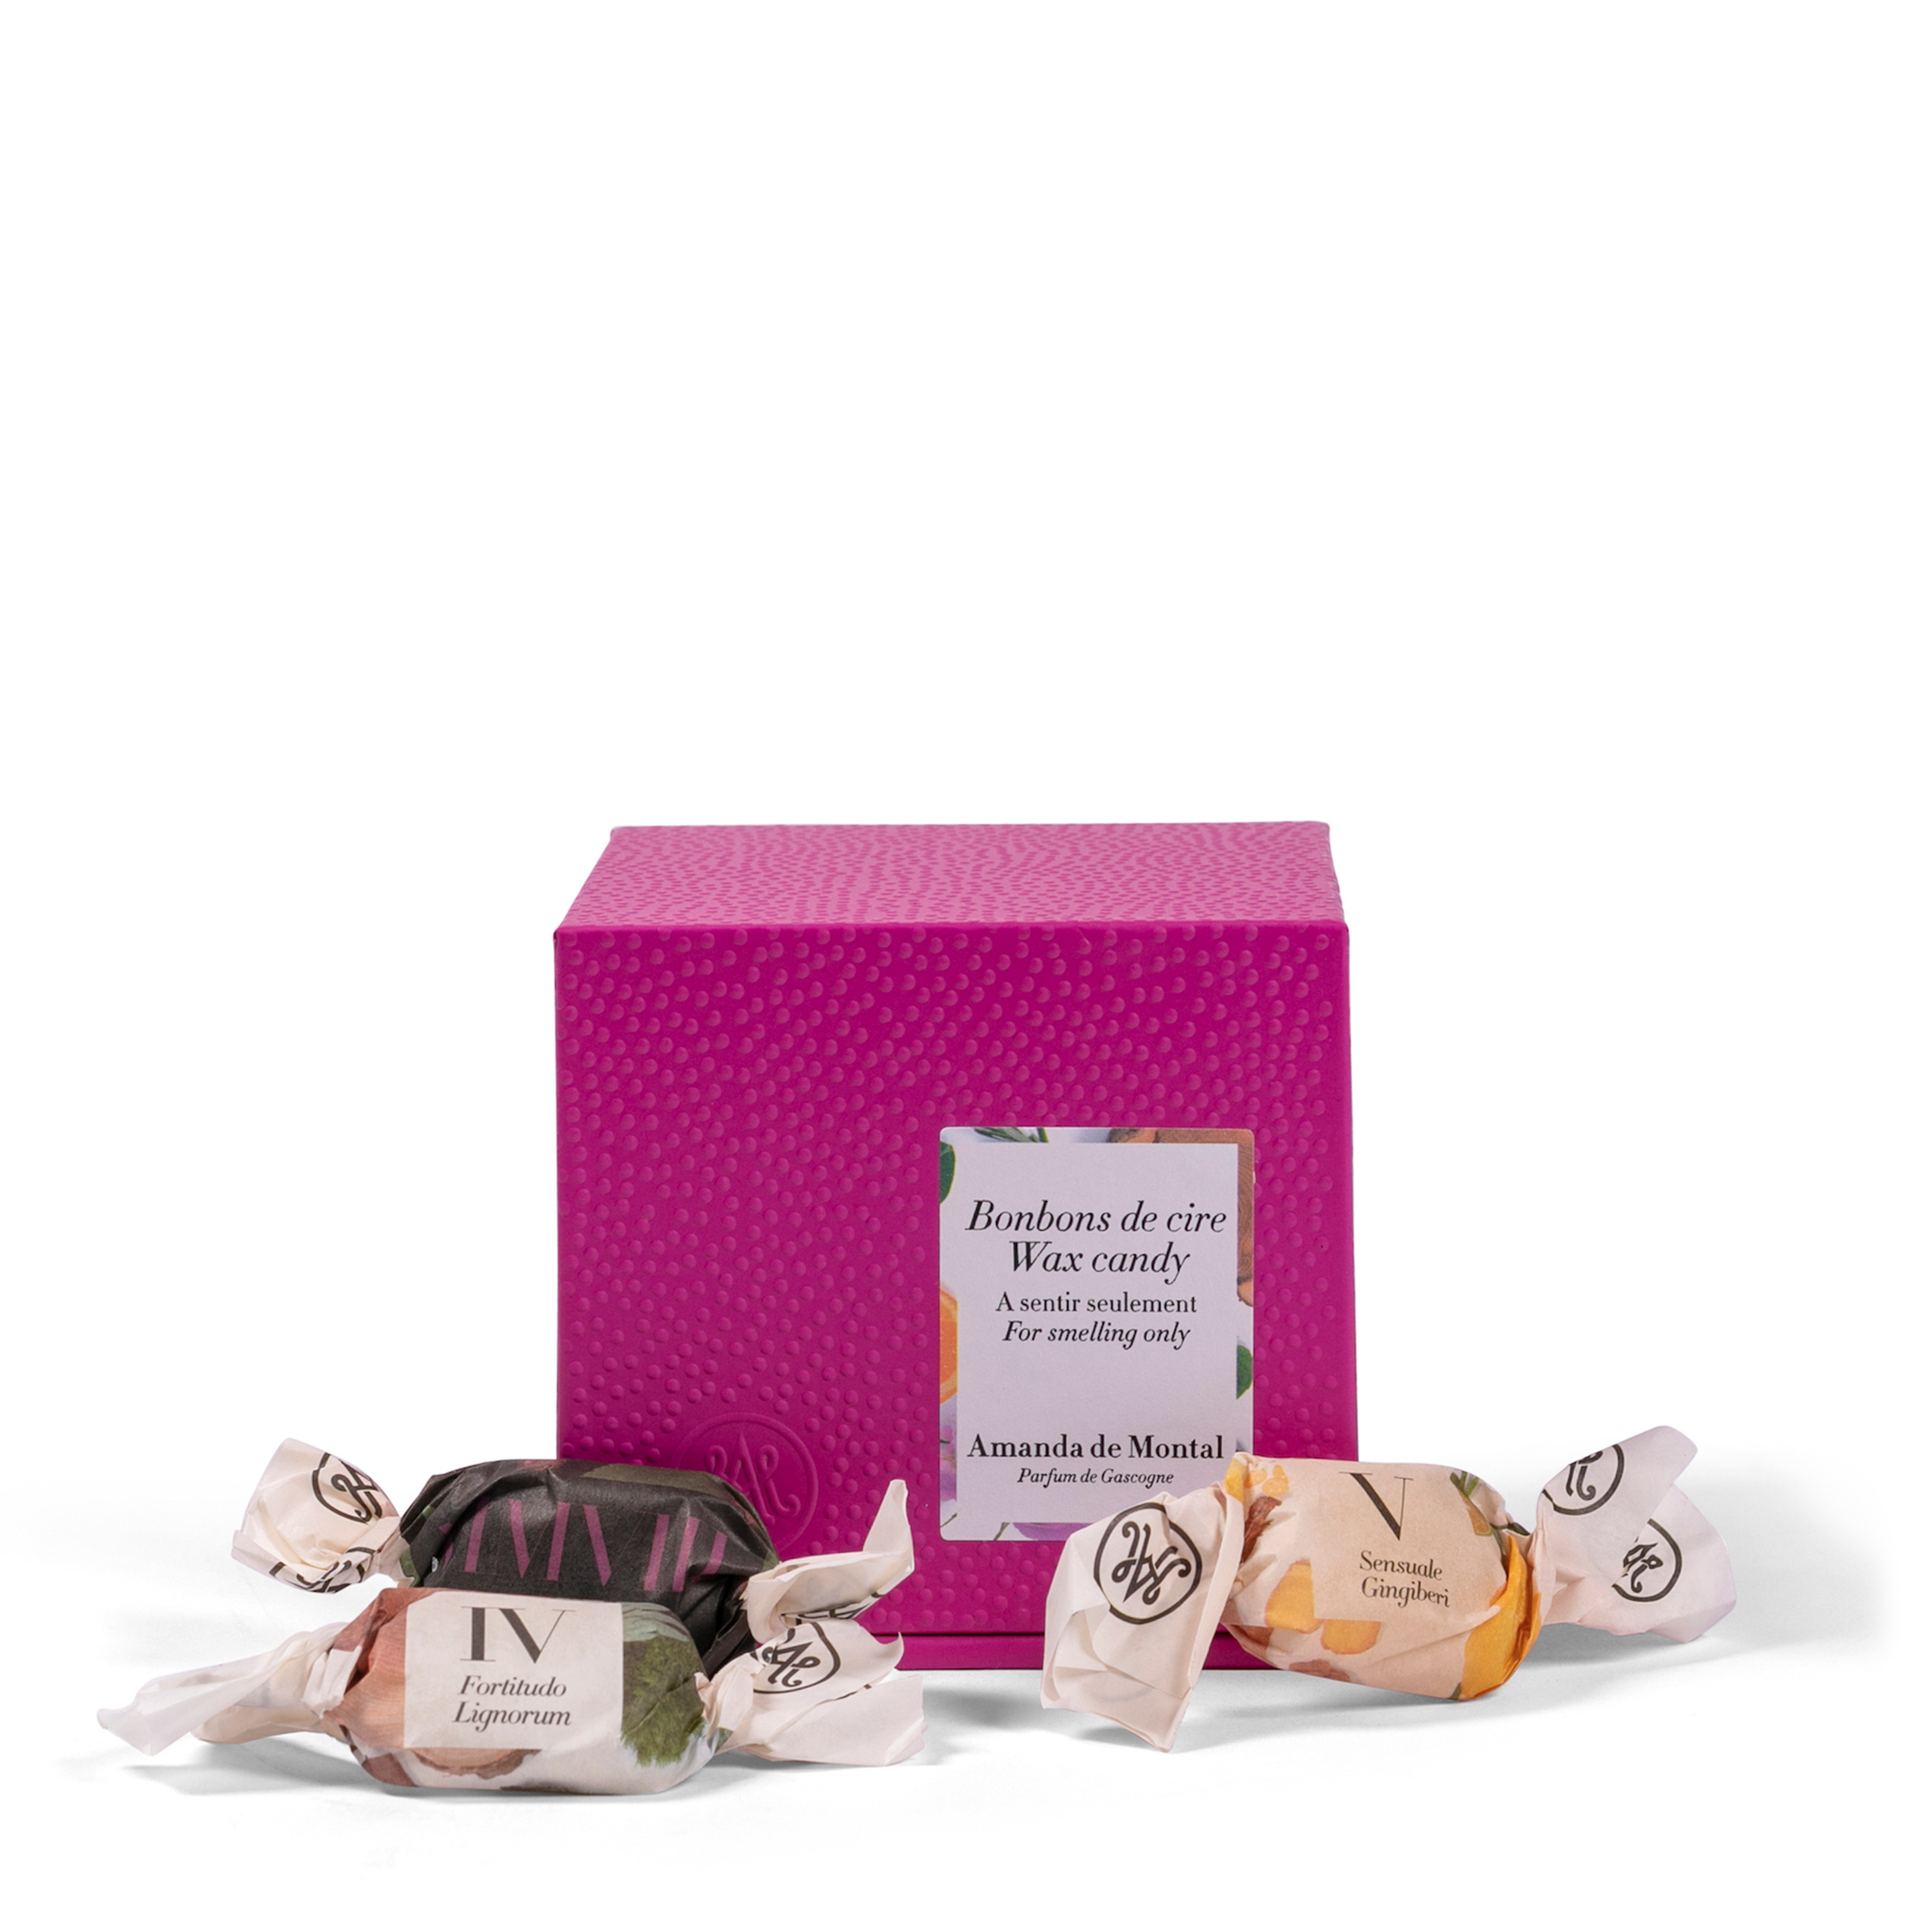 A small, elegant pink box containing a variety of perfumed wax candies. Each scented wax candy is crafted from natural, plant-based waxes, precisely blended to release delightful aromas. 